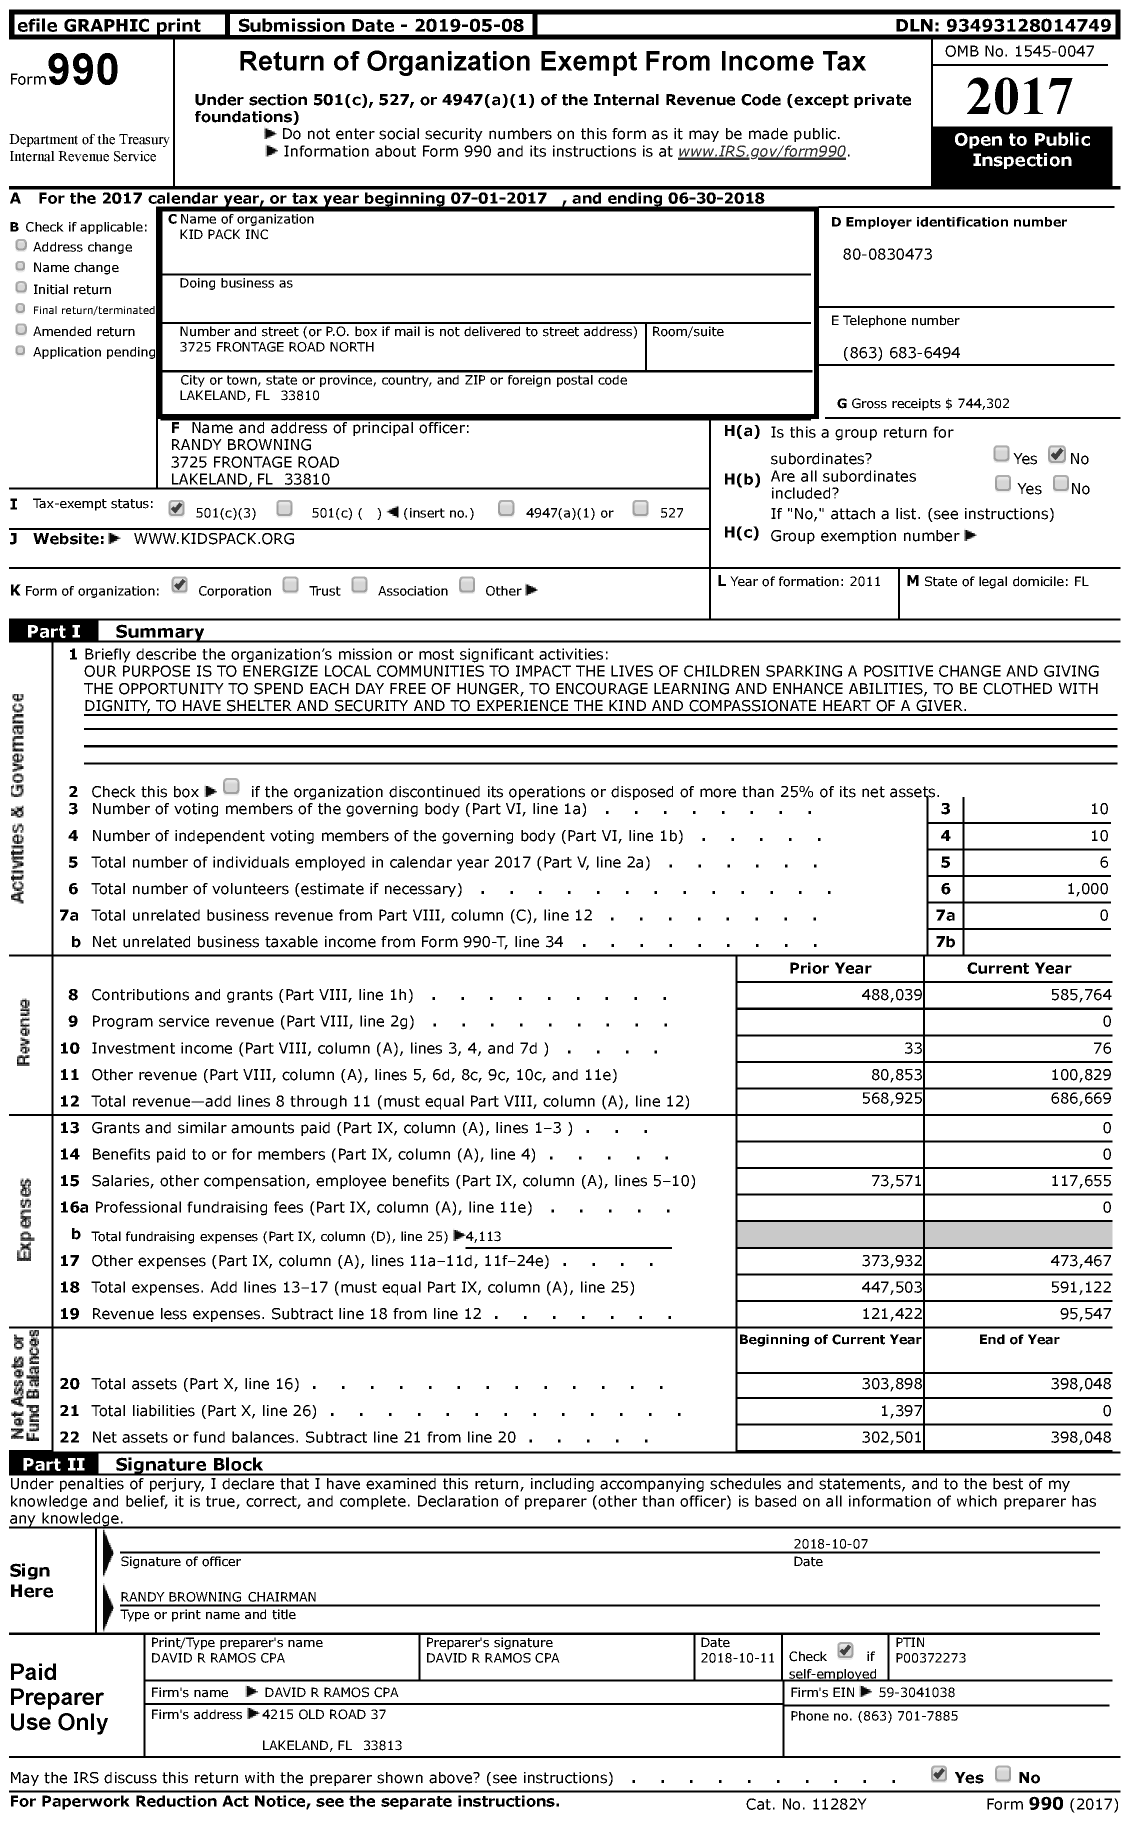 Image of first page of 2017 Form 990 for Kids Pack